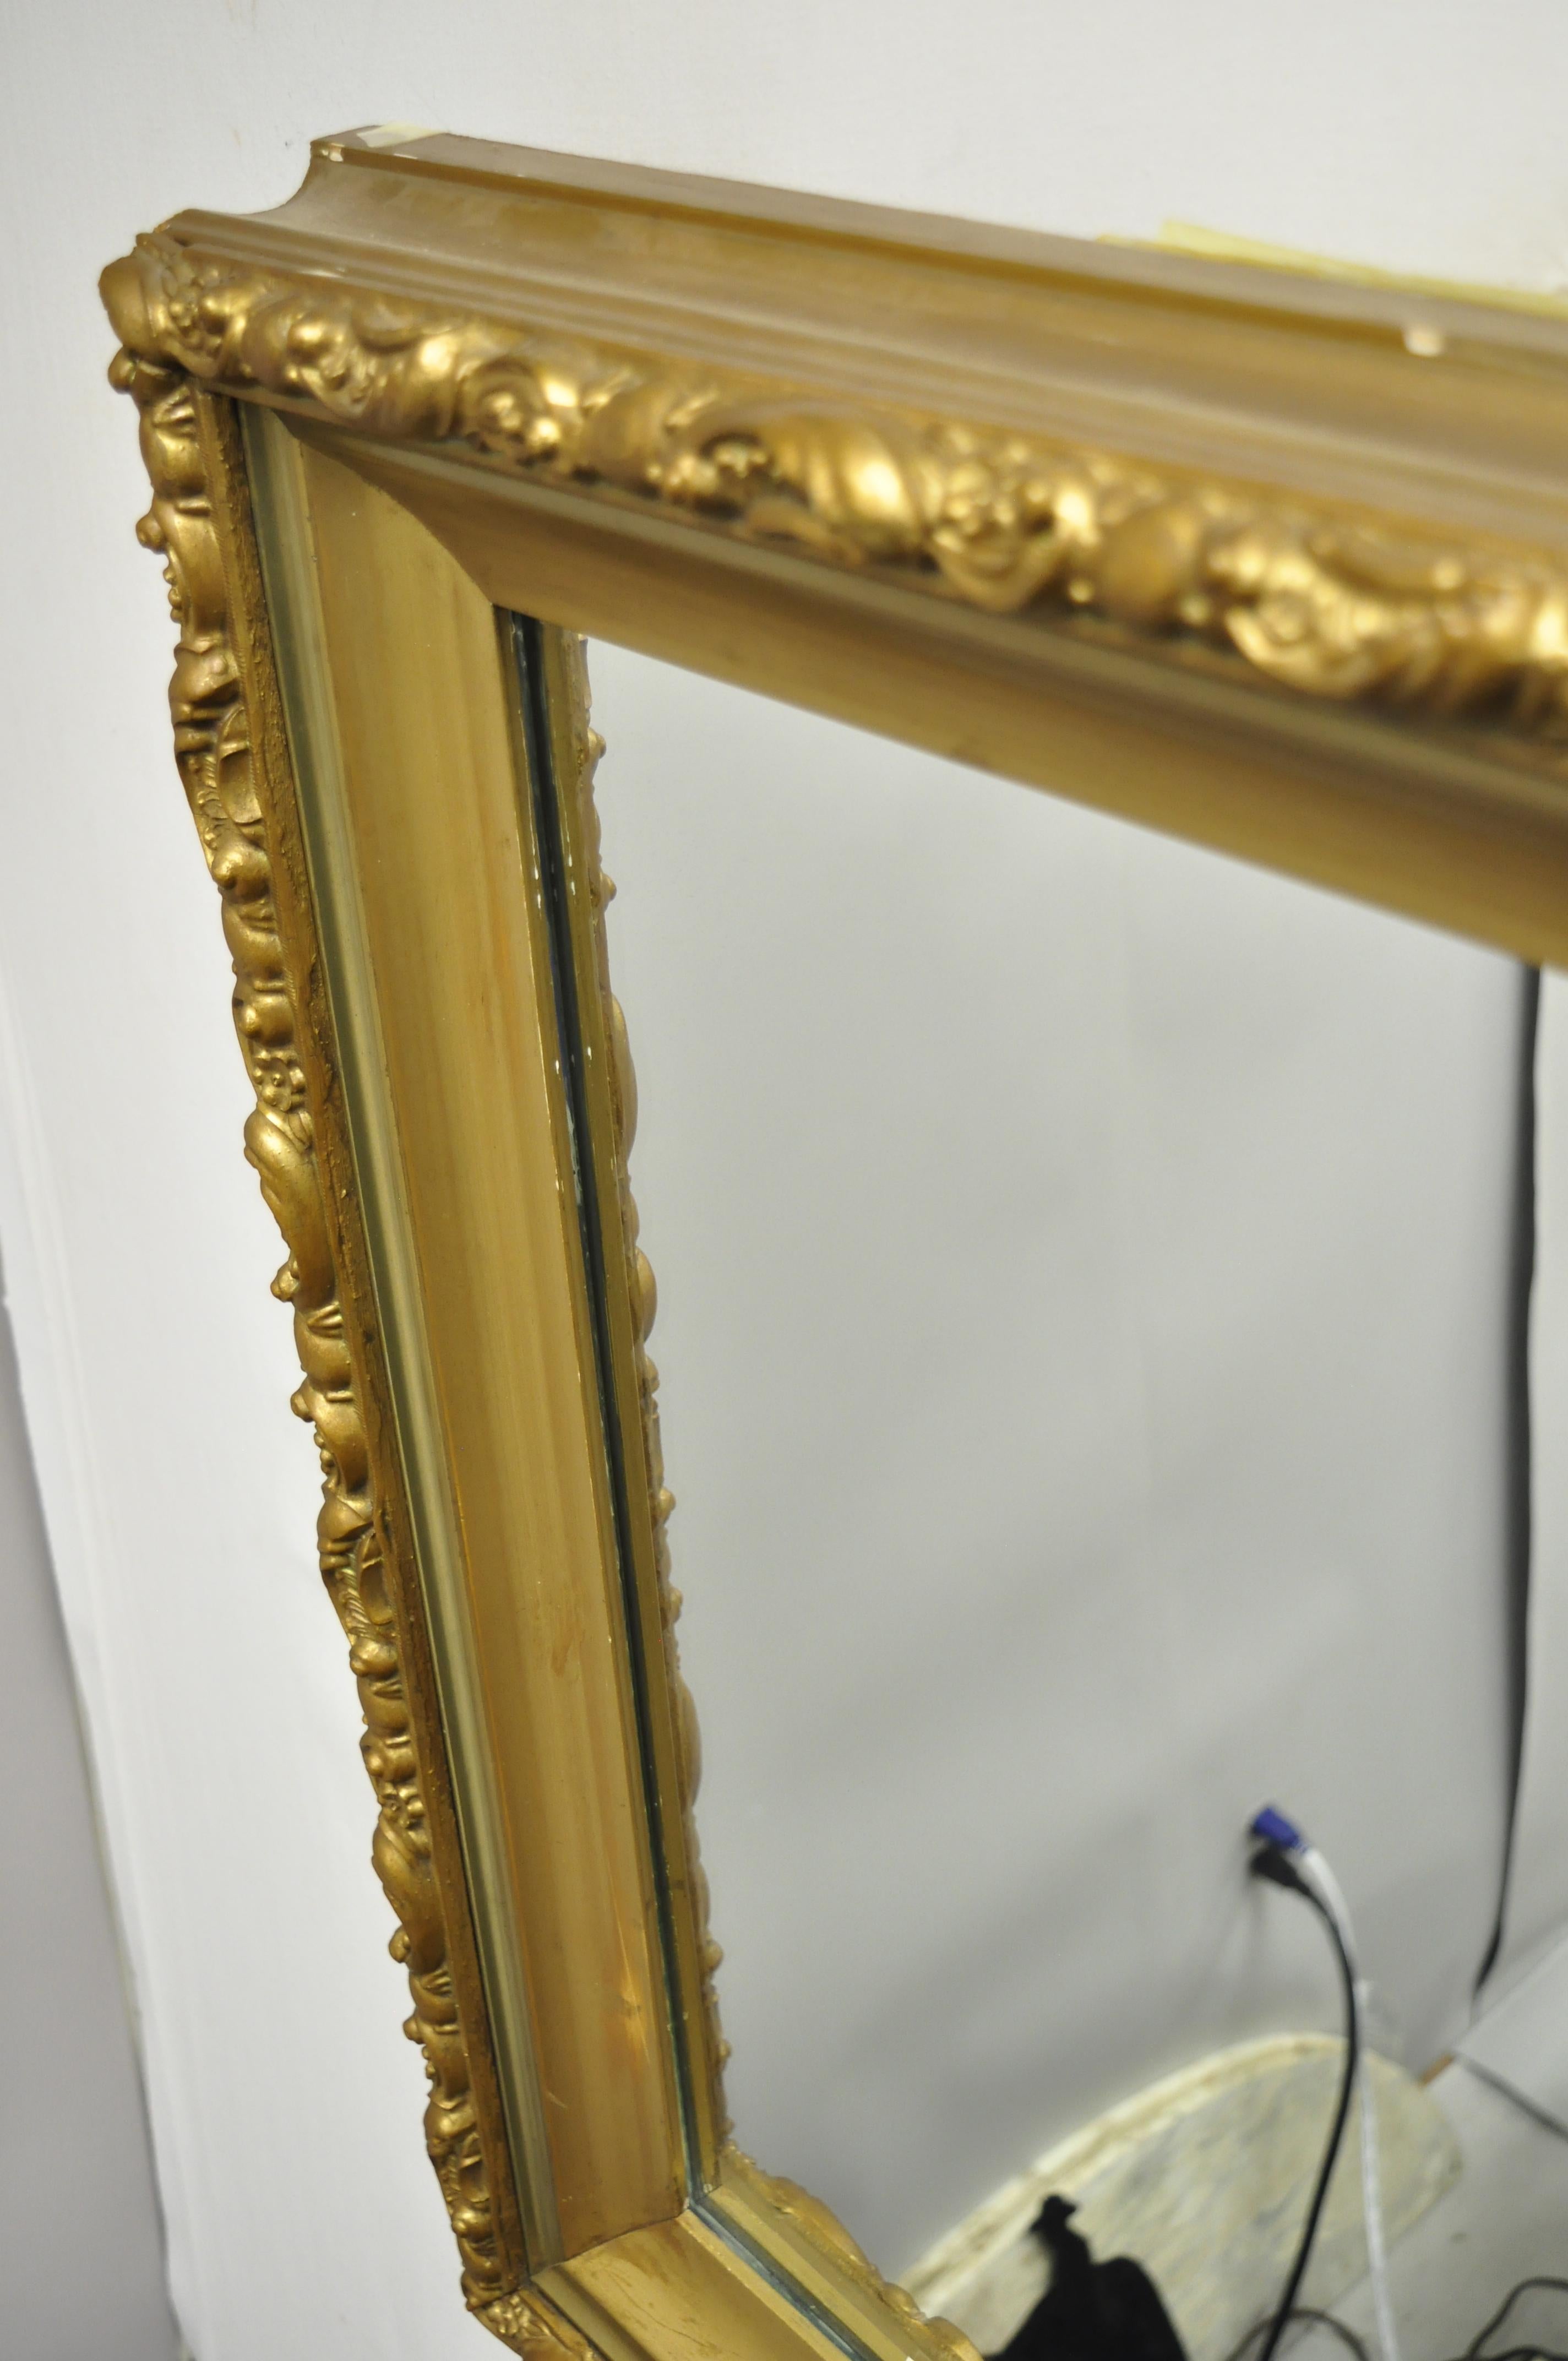 North American Antique Gold Giltwood Gesso French Victorian Deep Frame Wall Mirror For Sale